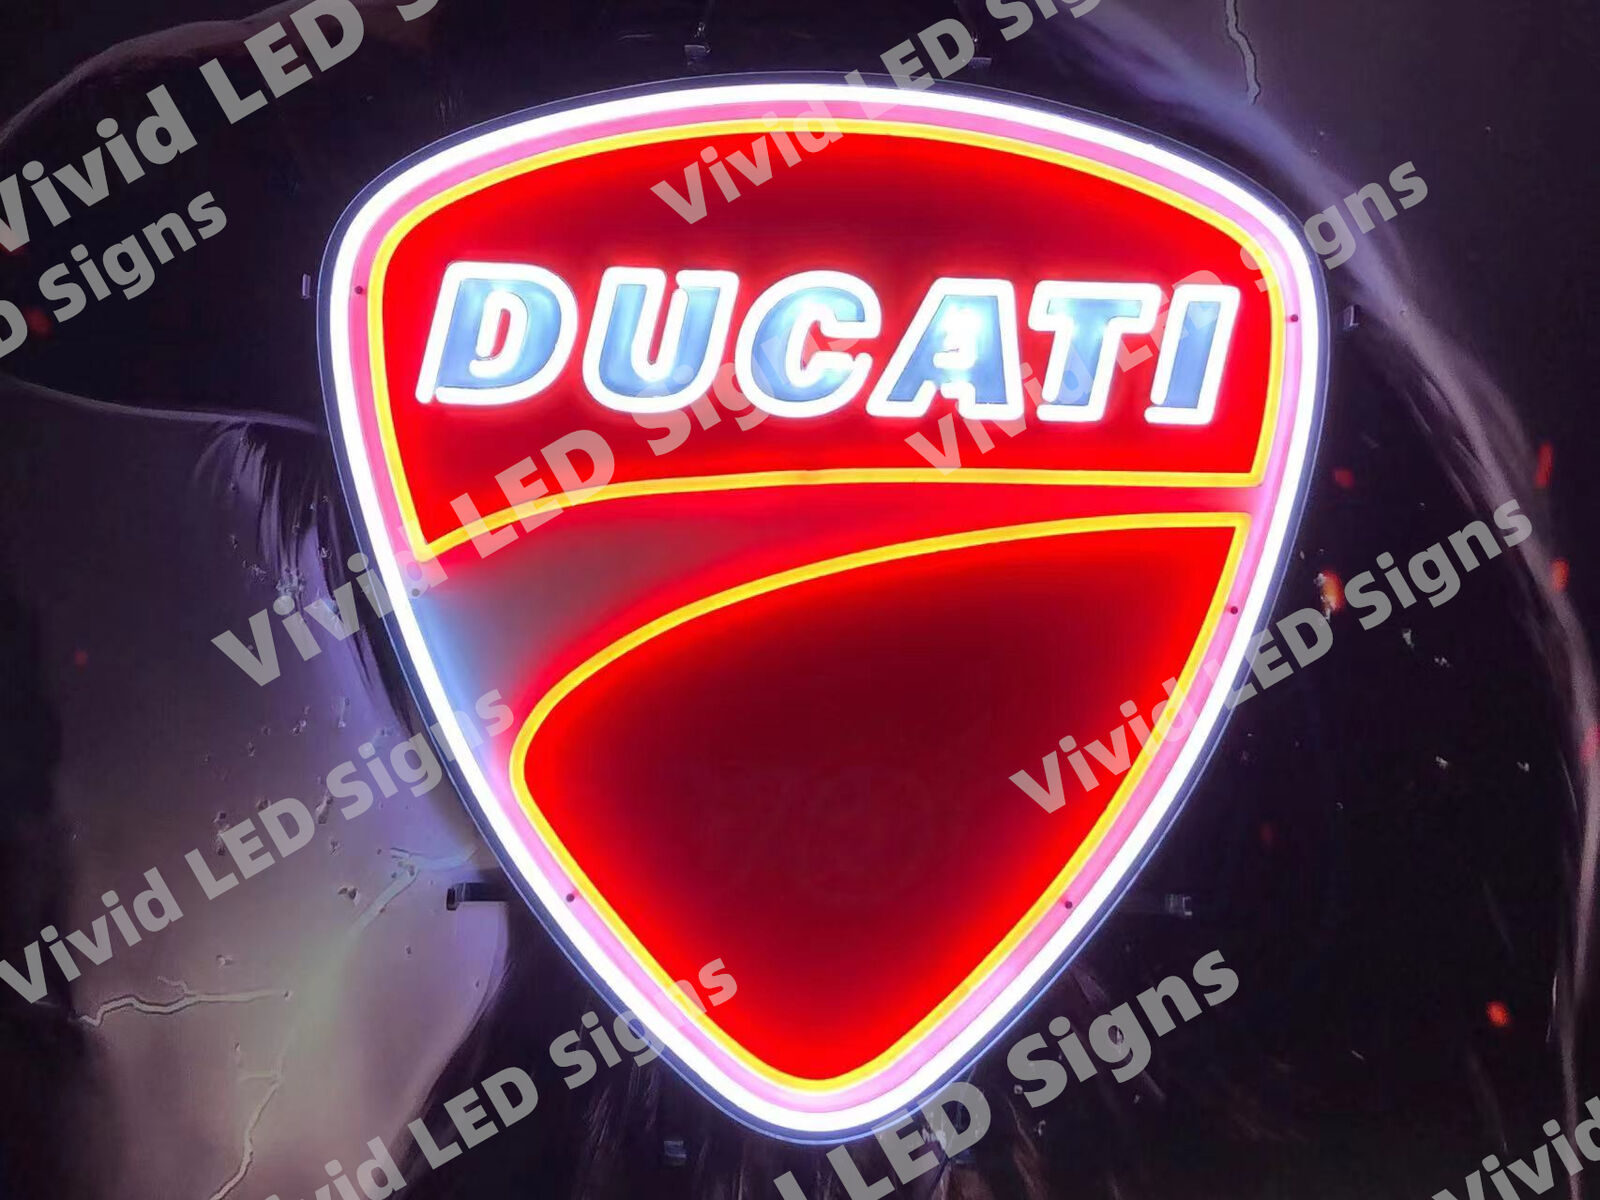 Ducati Italian Motorcycles Auto Vivid LED Neon Sign Light Lamp With Dimmer